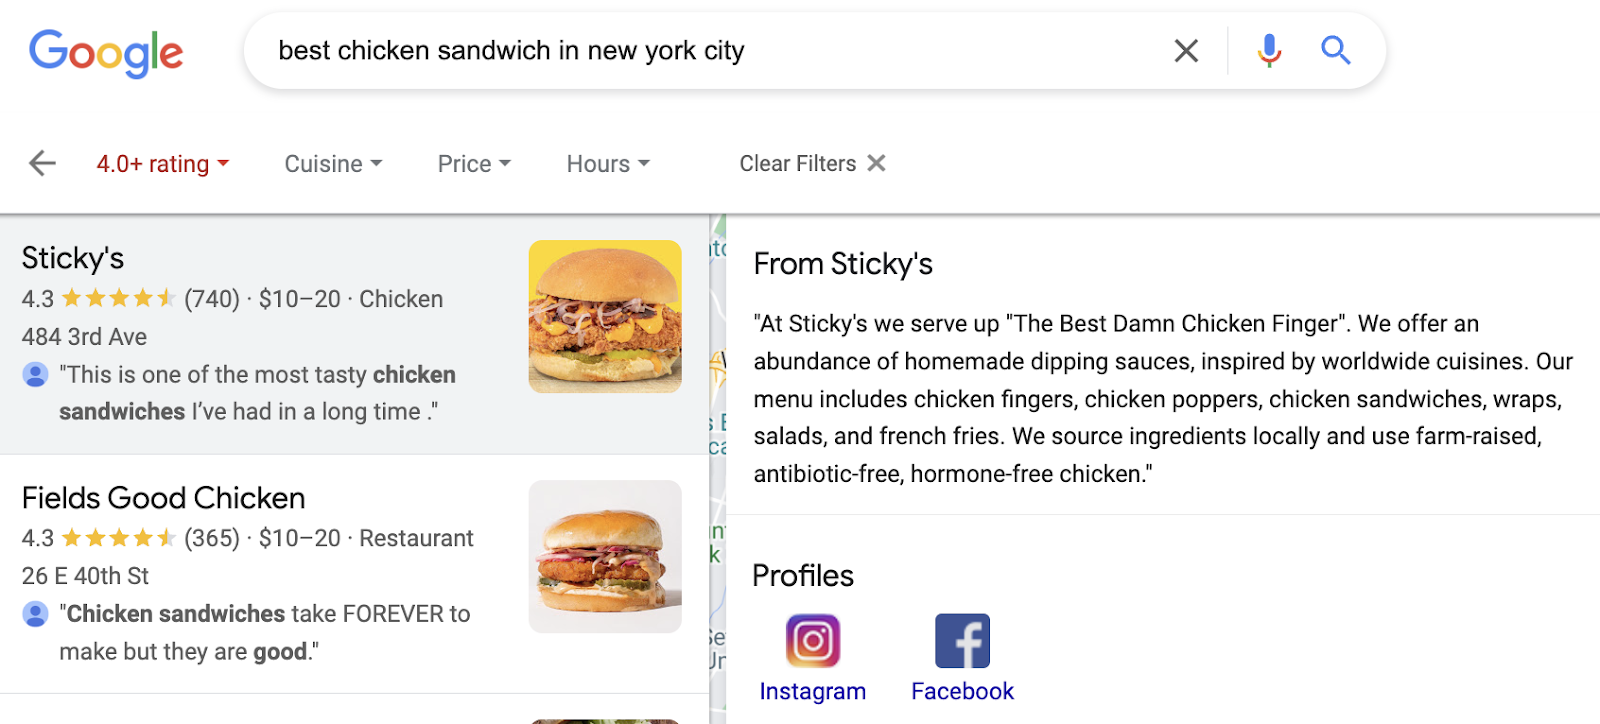 Sticky's example on how to use keywords in business description to optimize for SEO